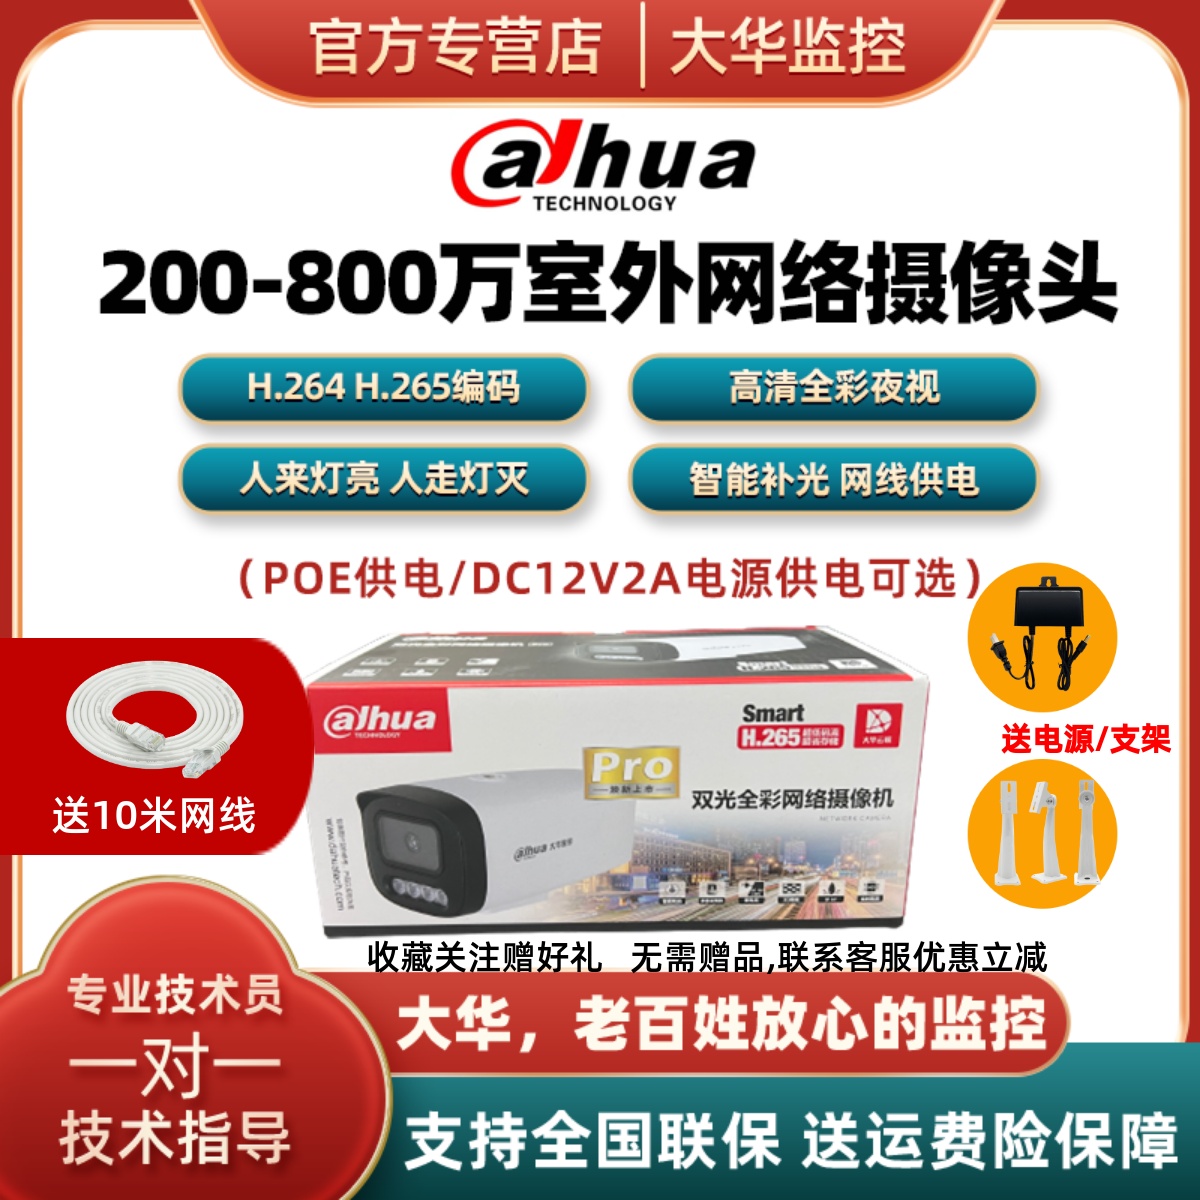 Dahua 2/4/8 million H.265 monitoring head network digital high-definition full color warning indoor and outdoor cameras